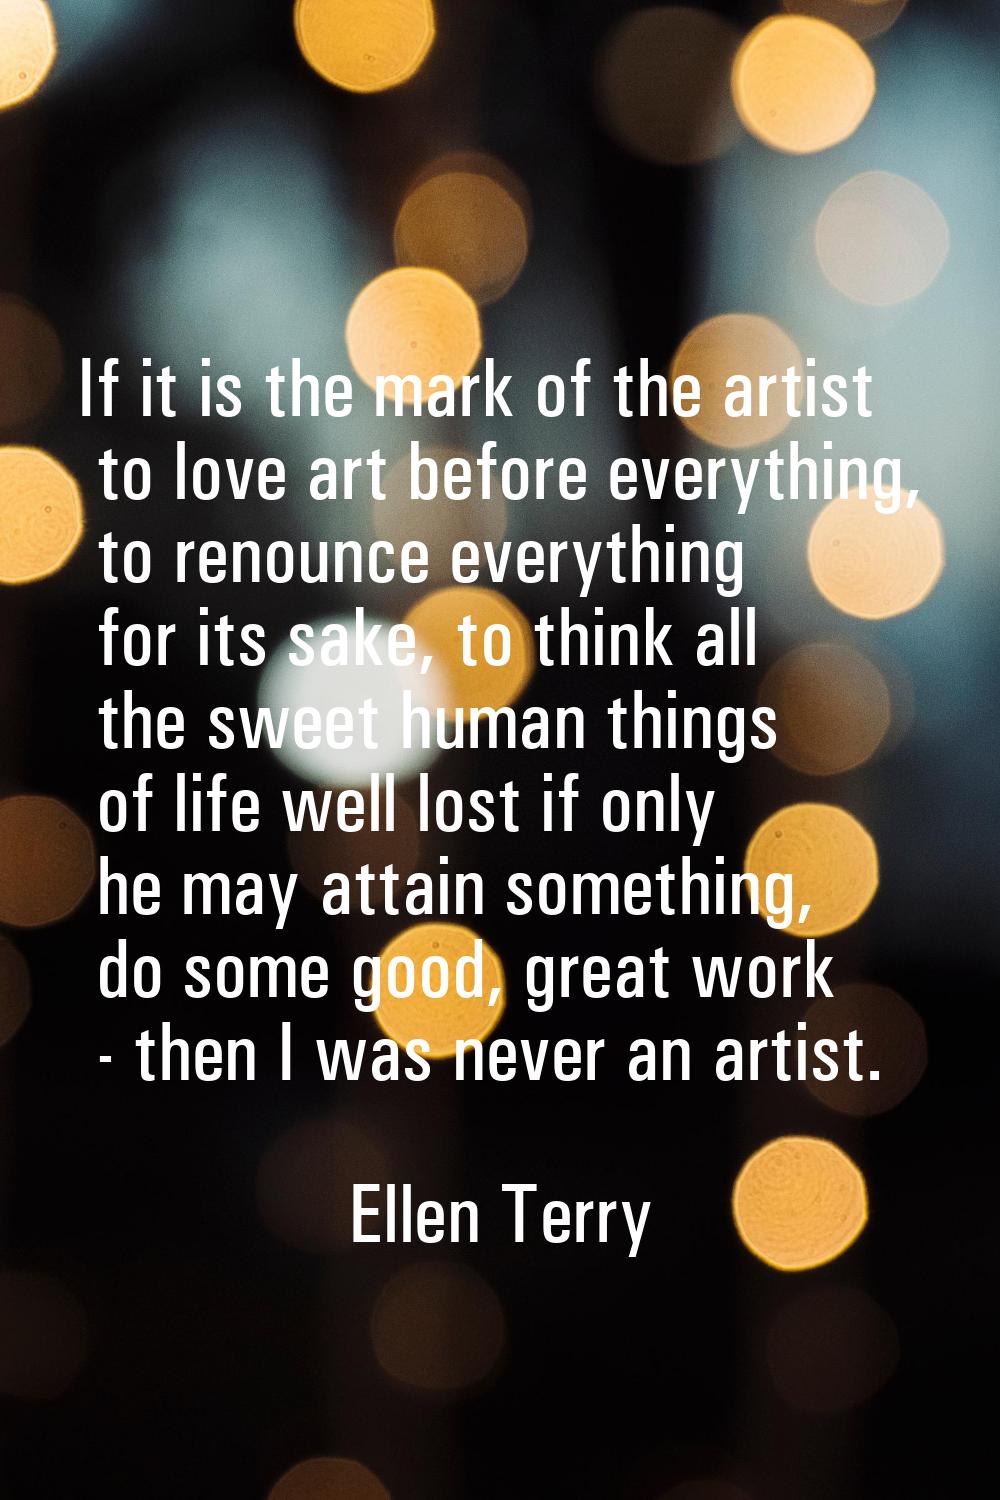 If it is the mark of the artist to love art before everything, to renounce everything for its sake,